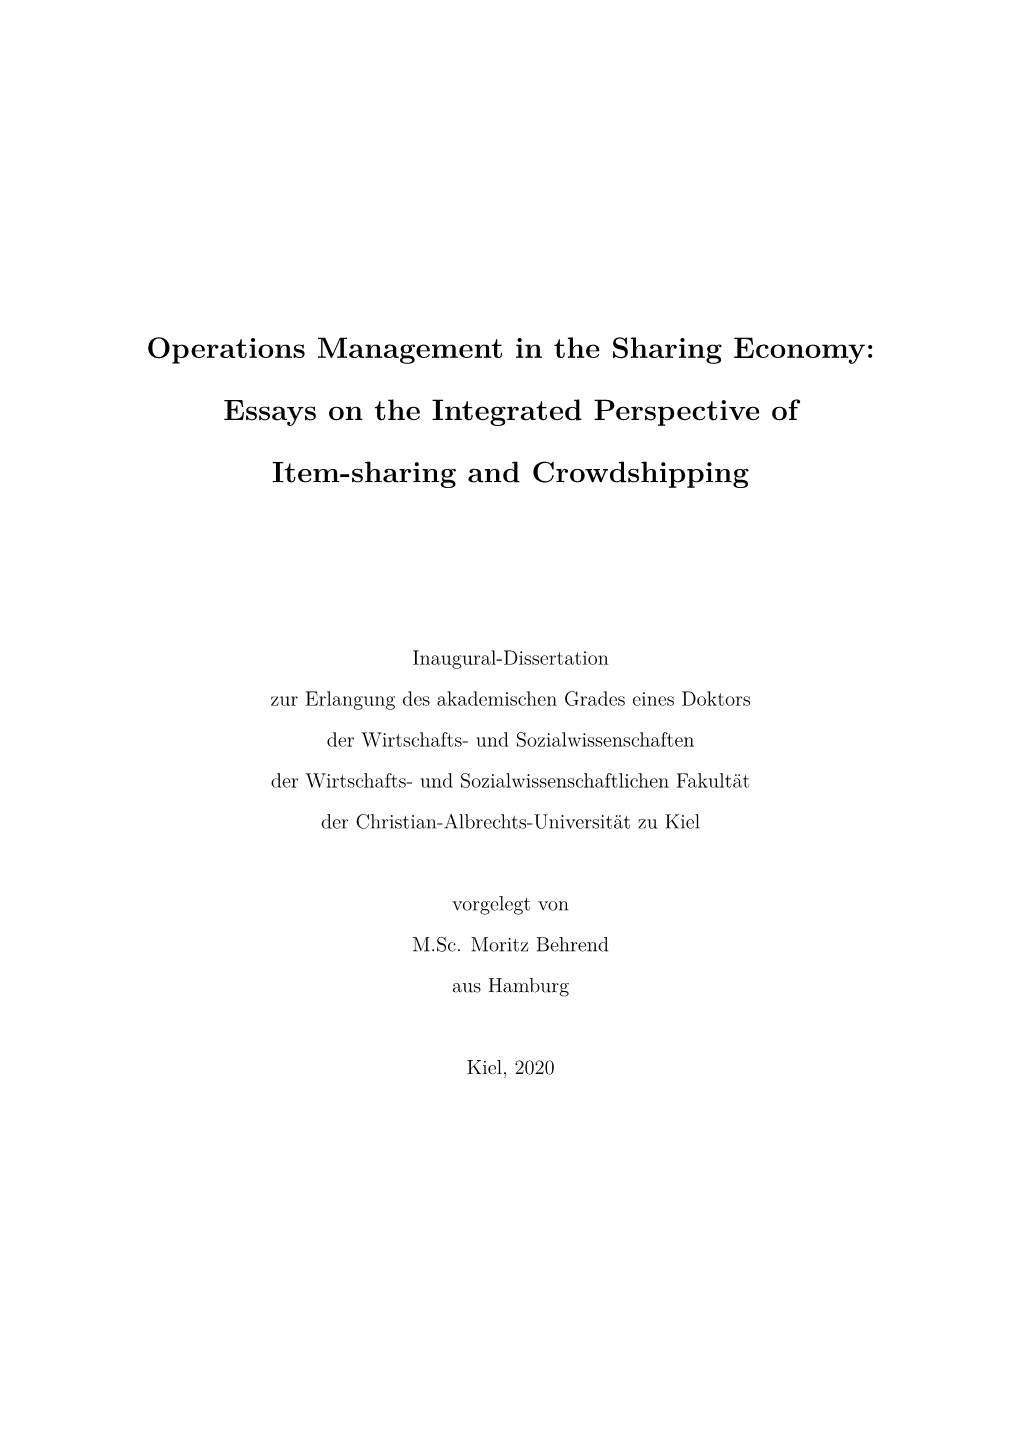 Operations Management in the Sharing Economy: Essays on The